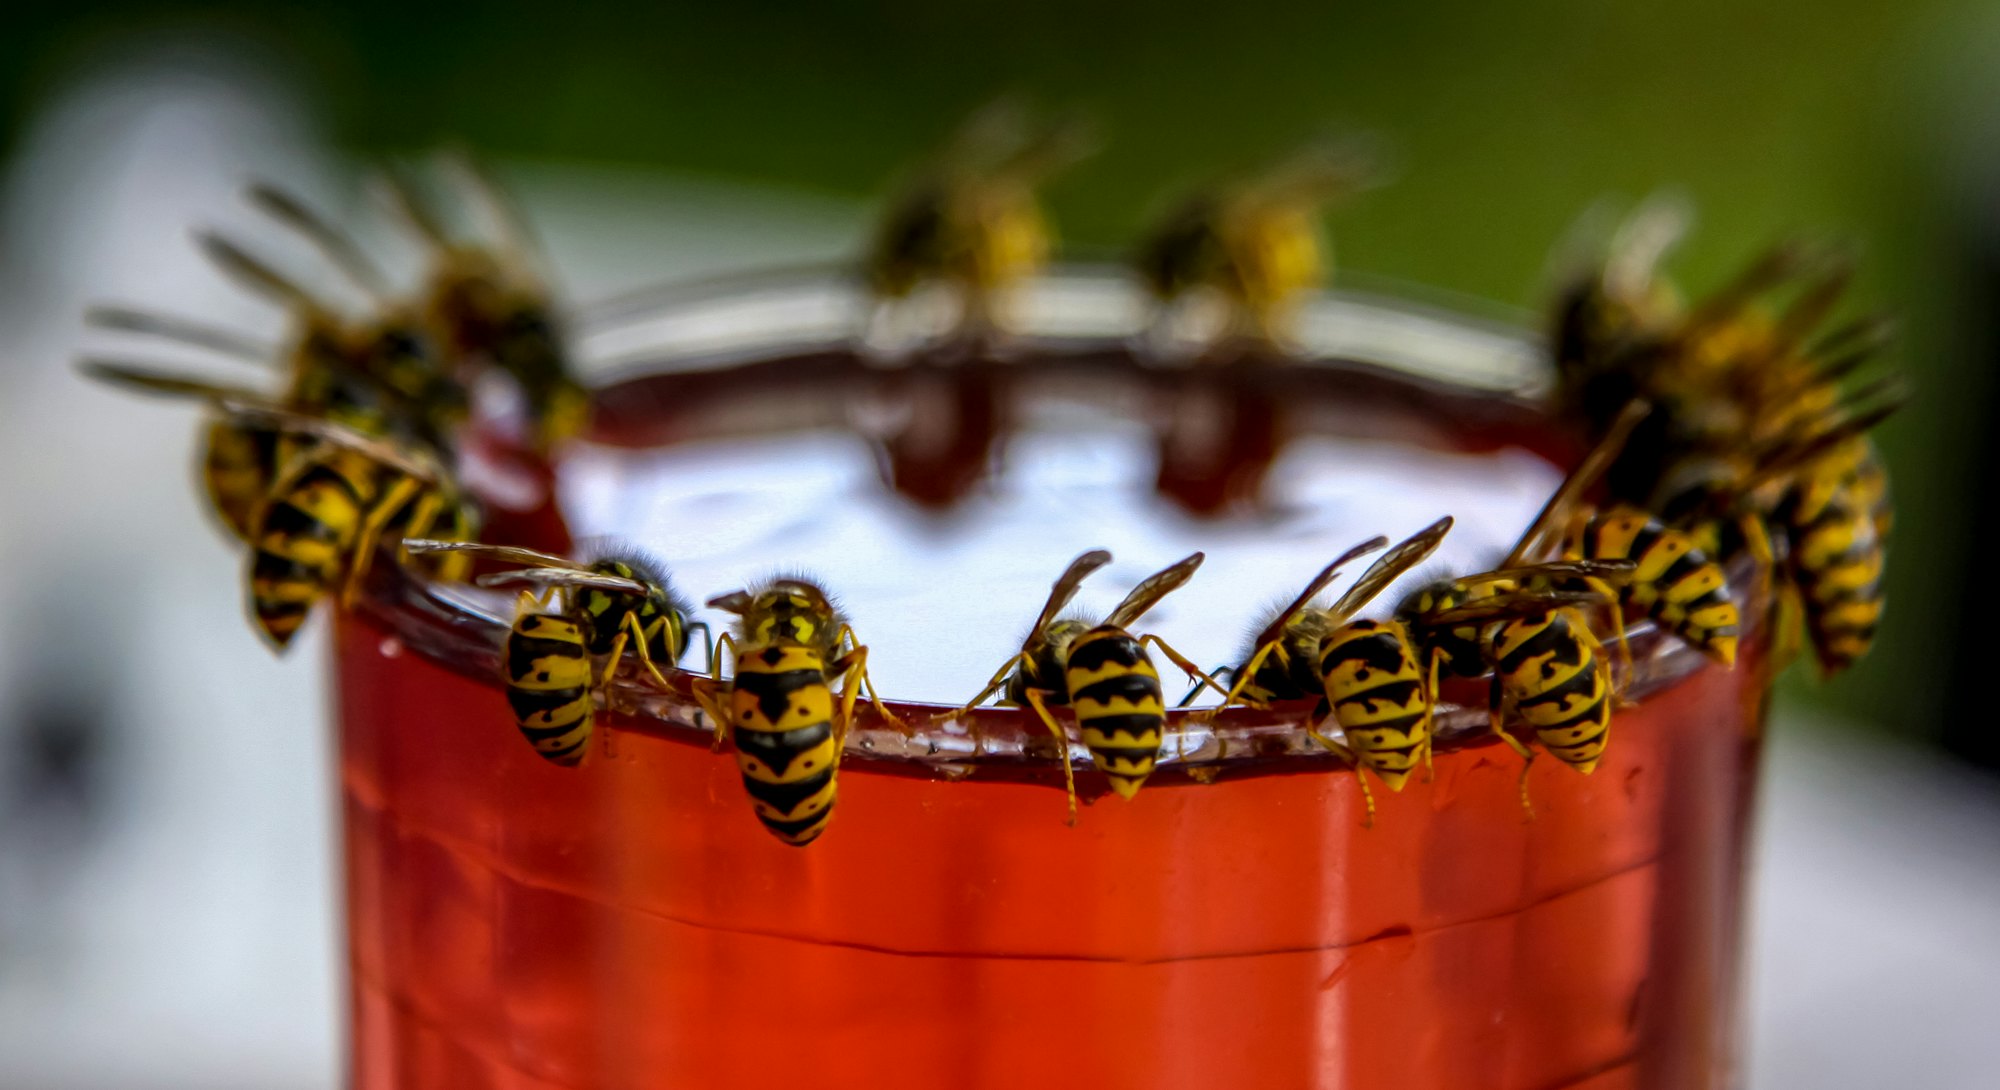 Wasps on glass with drink. Wasps feast. Wasps on the glass of sweet drink. Wasps are winged insects ...